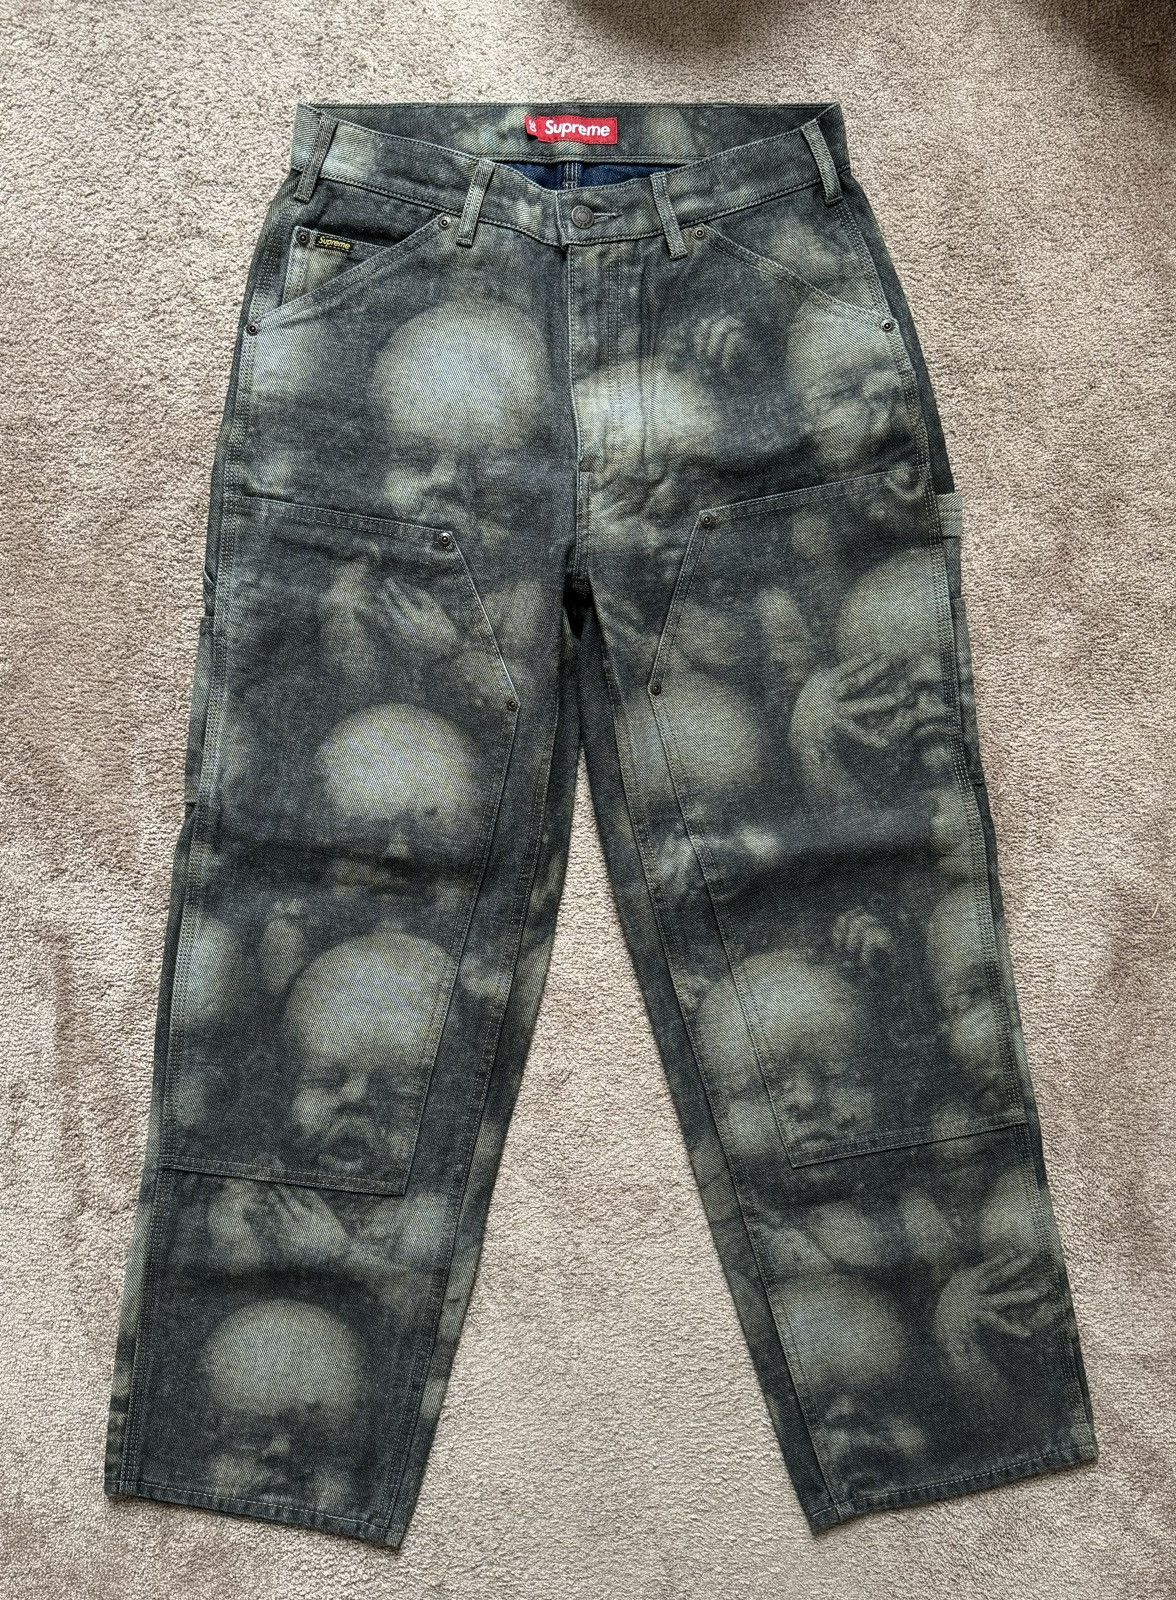 Supreme Supreme H.R. Giger double knee pant size 30 | Grailed